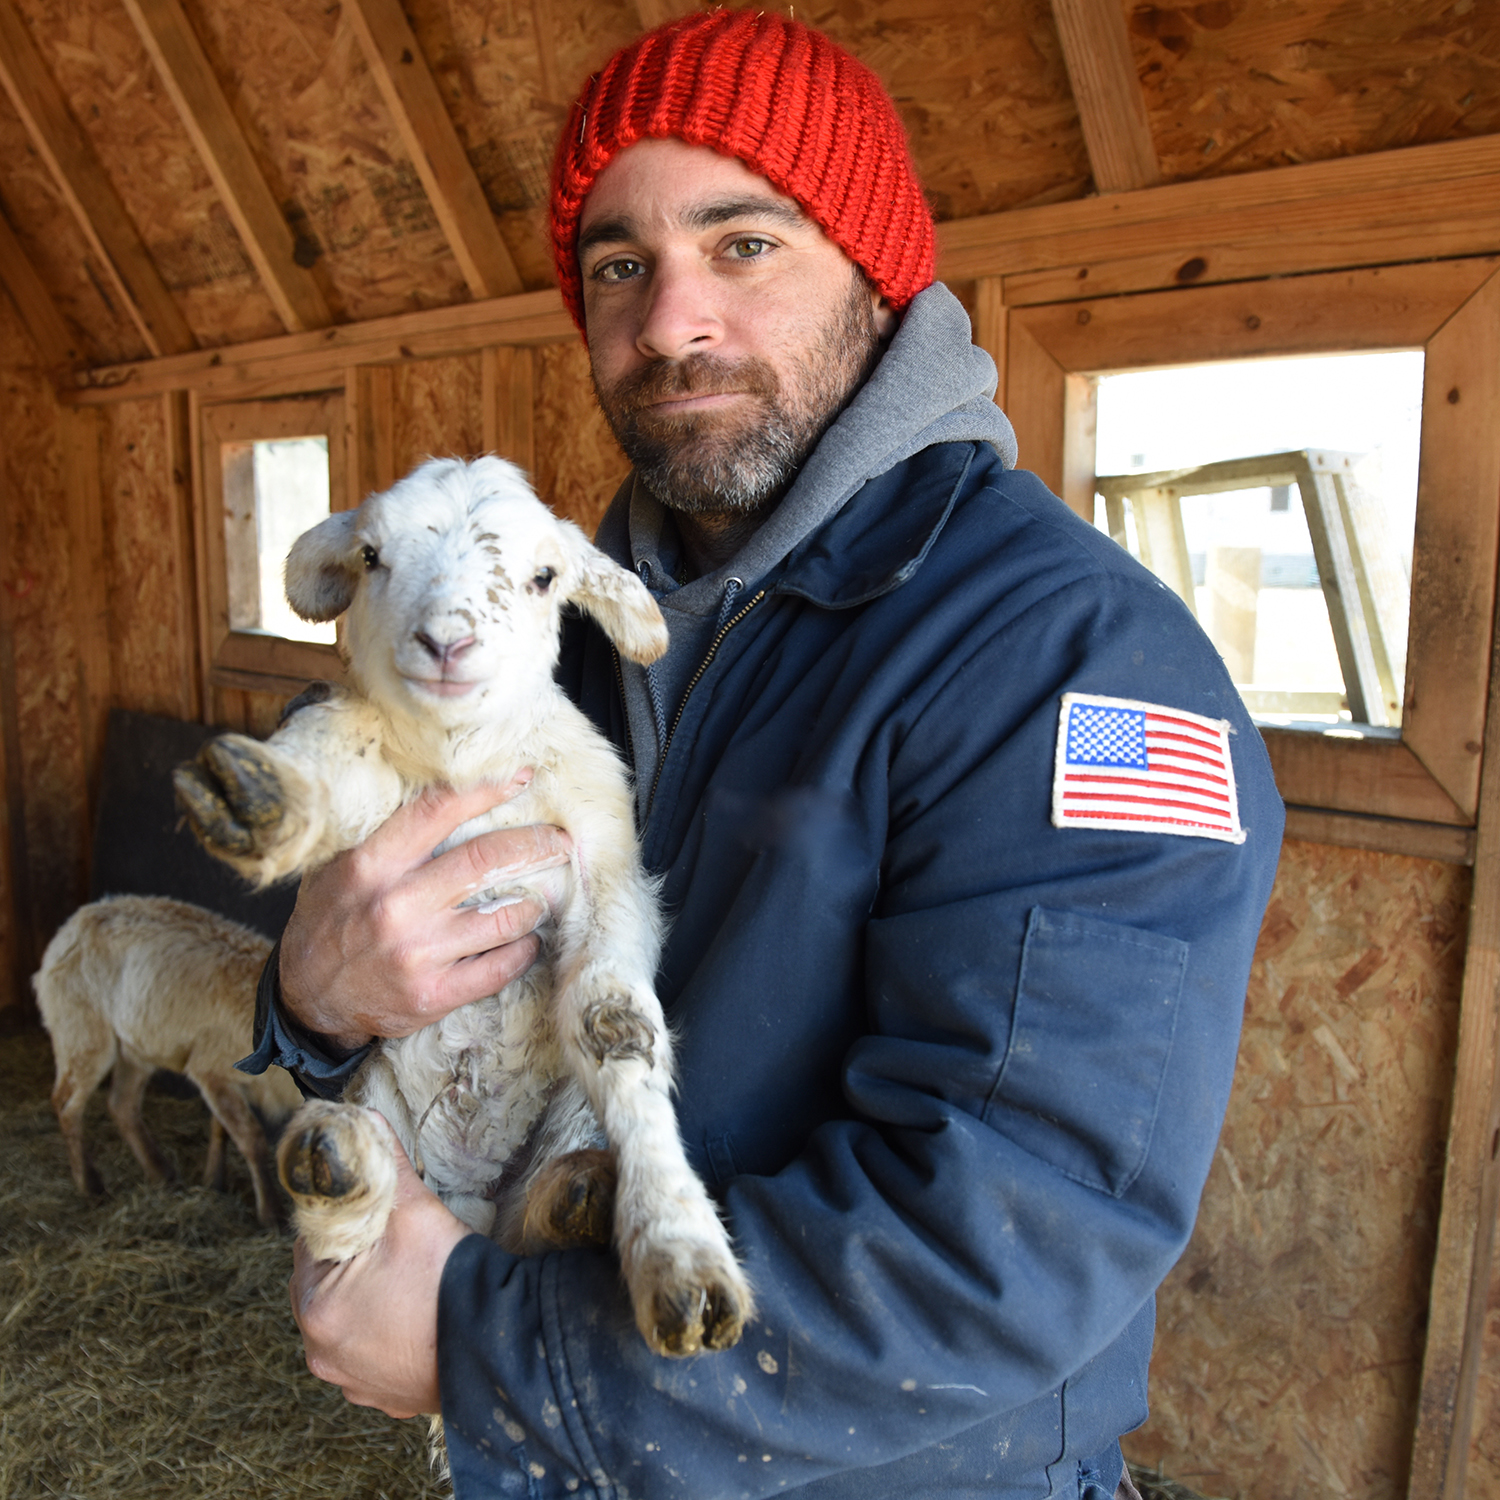 A man with a flag patch on his sleeve holds a lamb in a barn